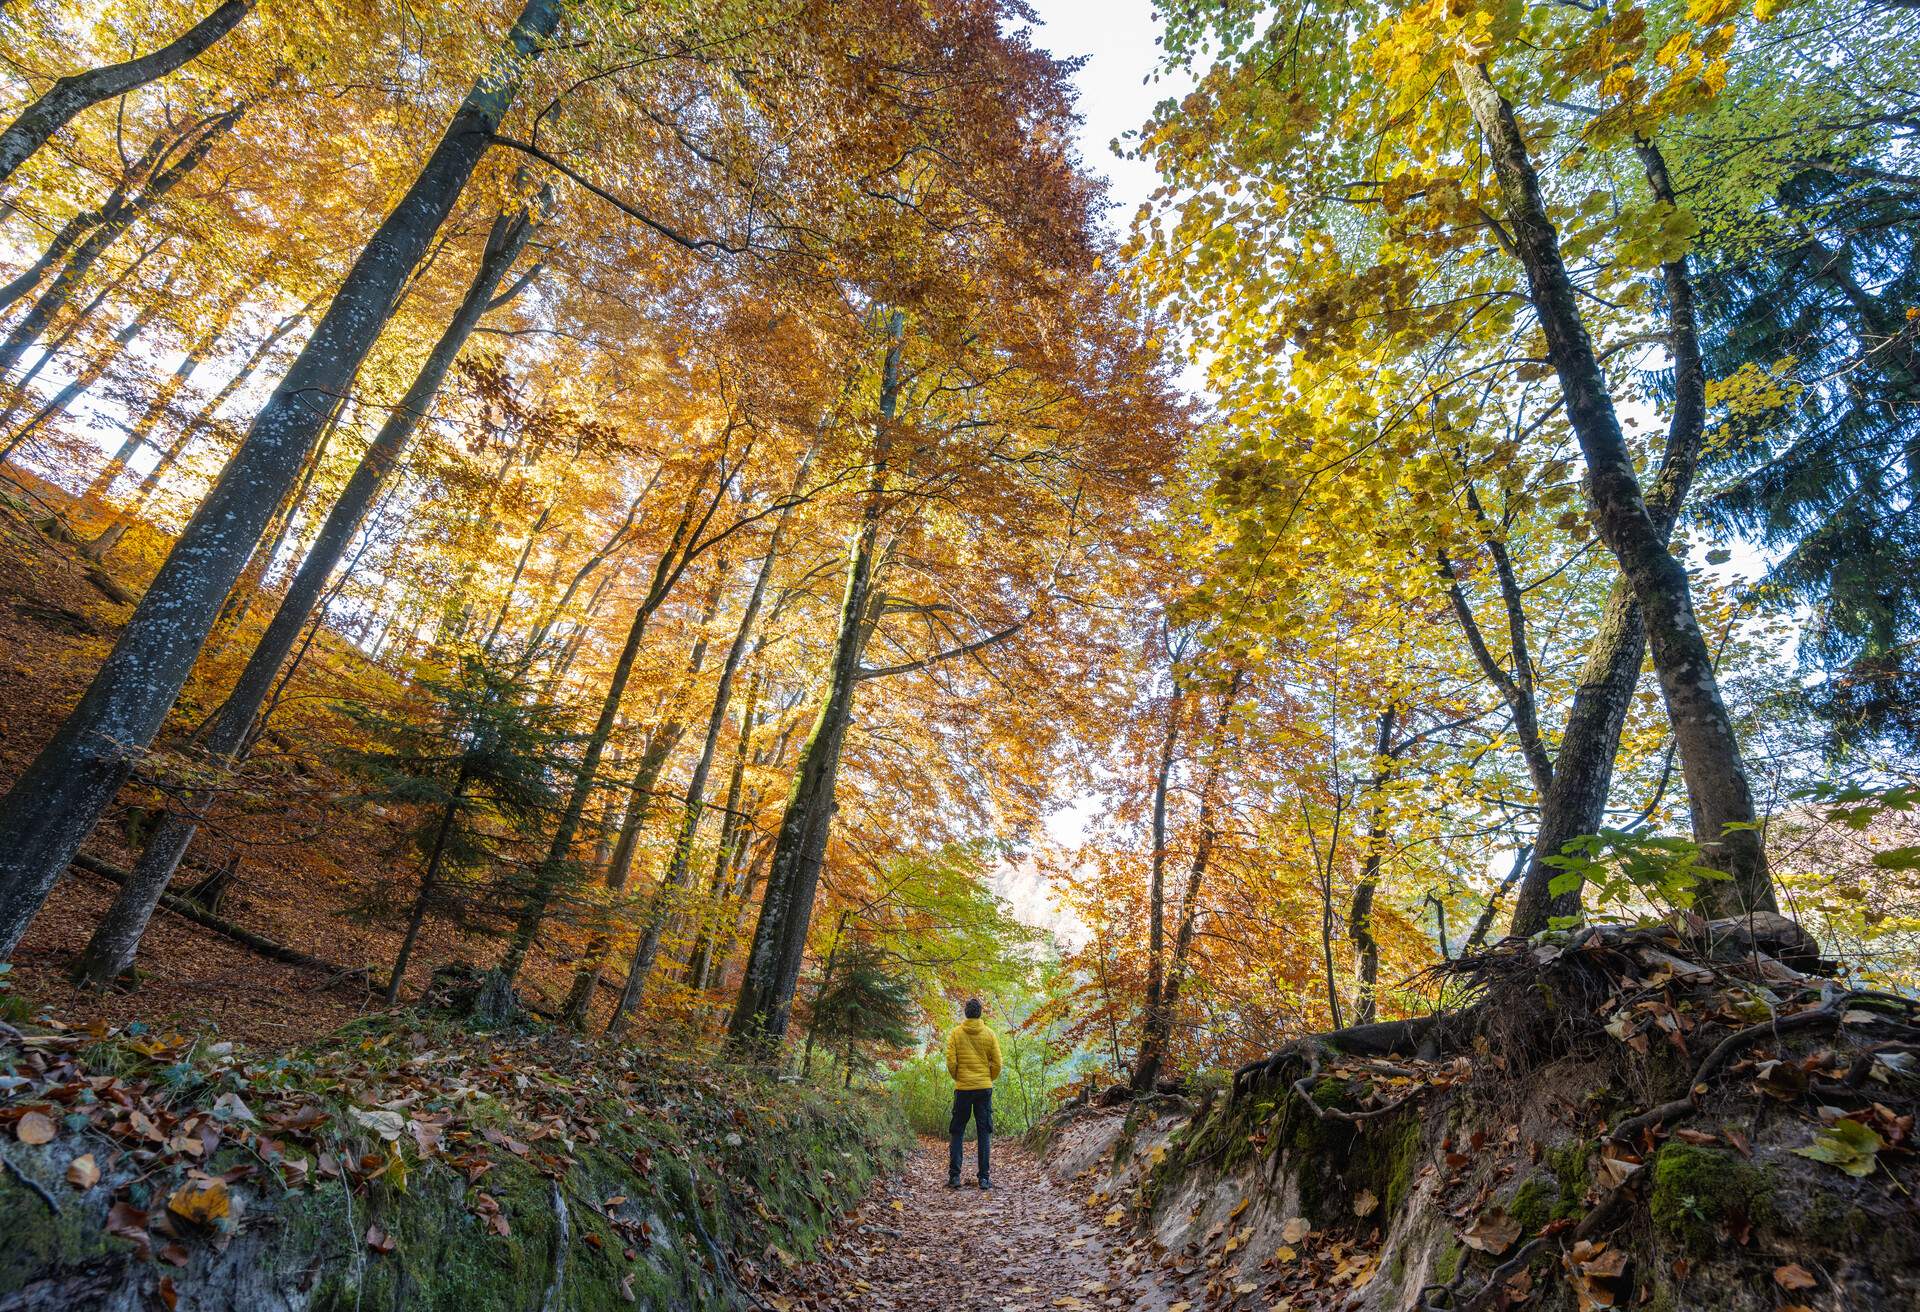 Man wearing a yellow jacket stand on a path covered with fallen leaves under the colourful autumnal trees.